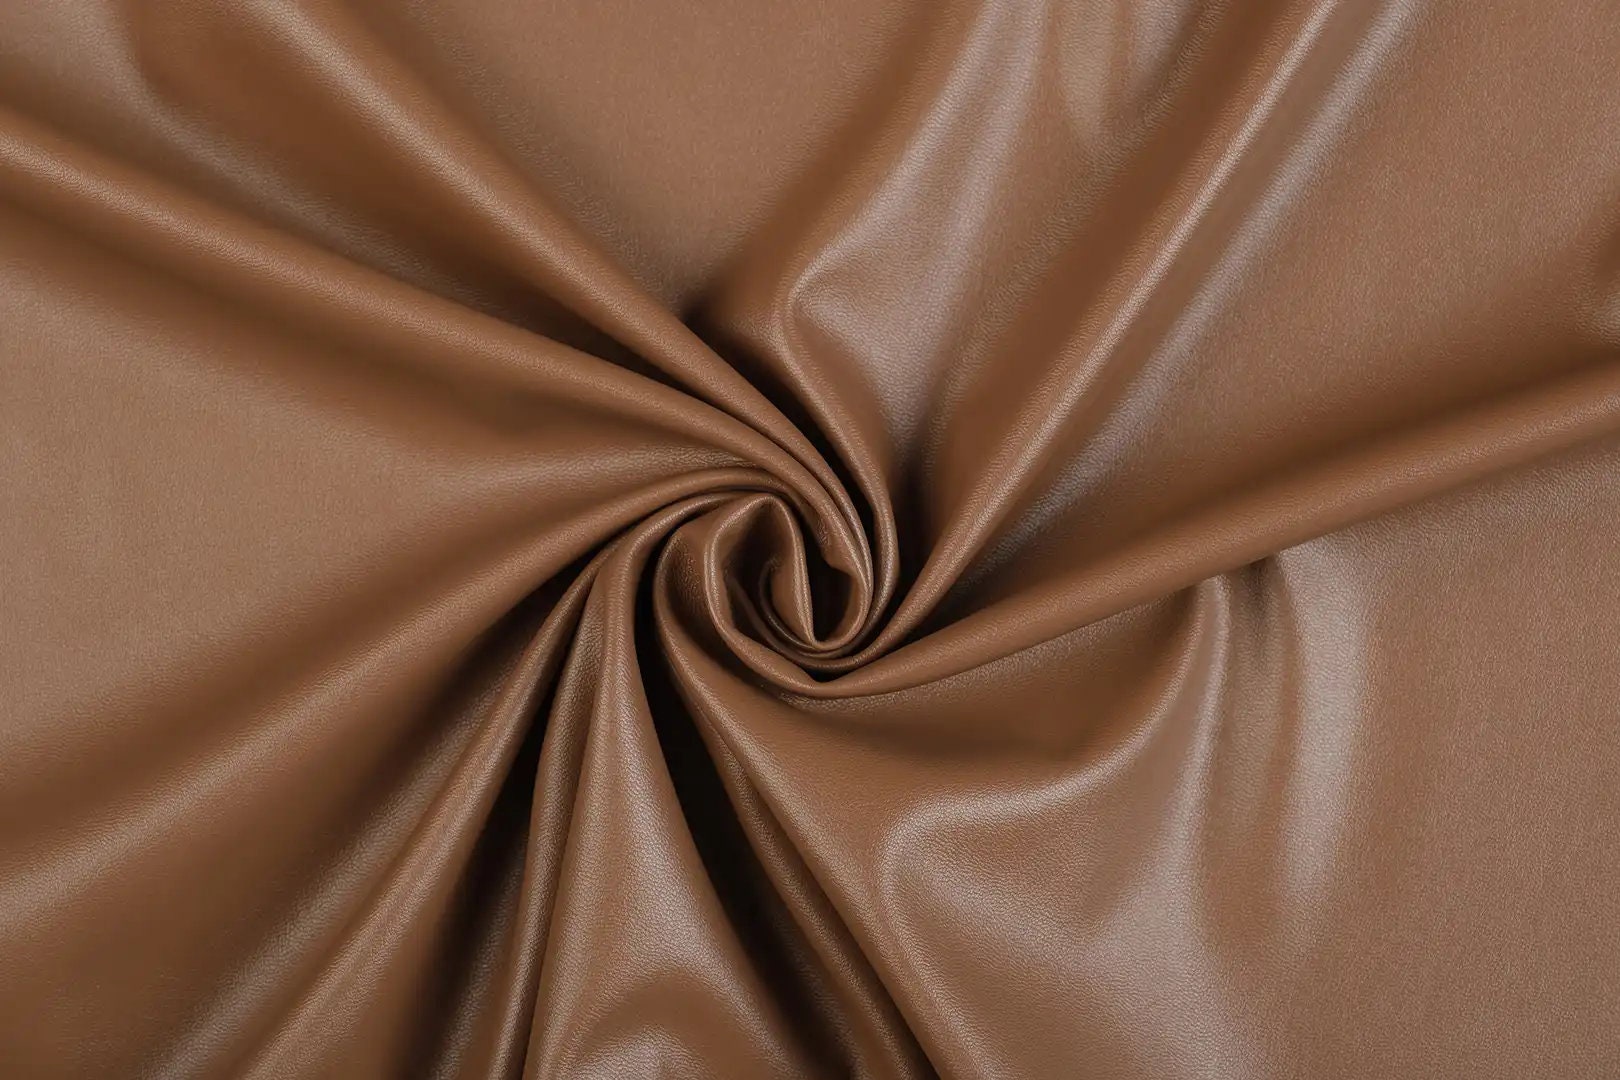 Stucco Faux Leather - Fabric by the Yard